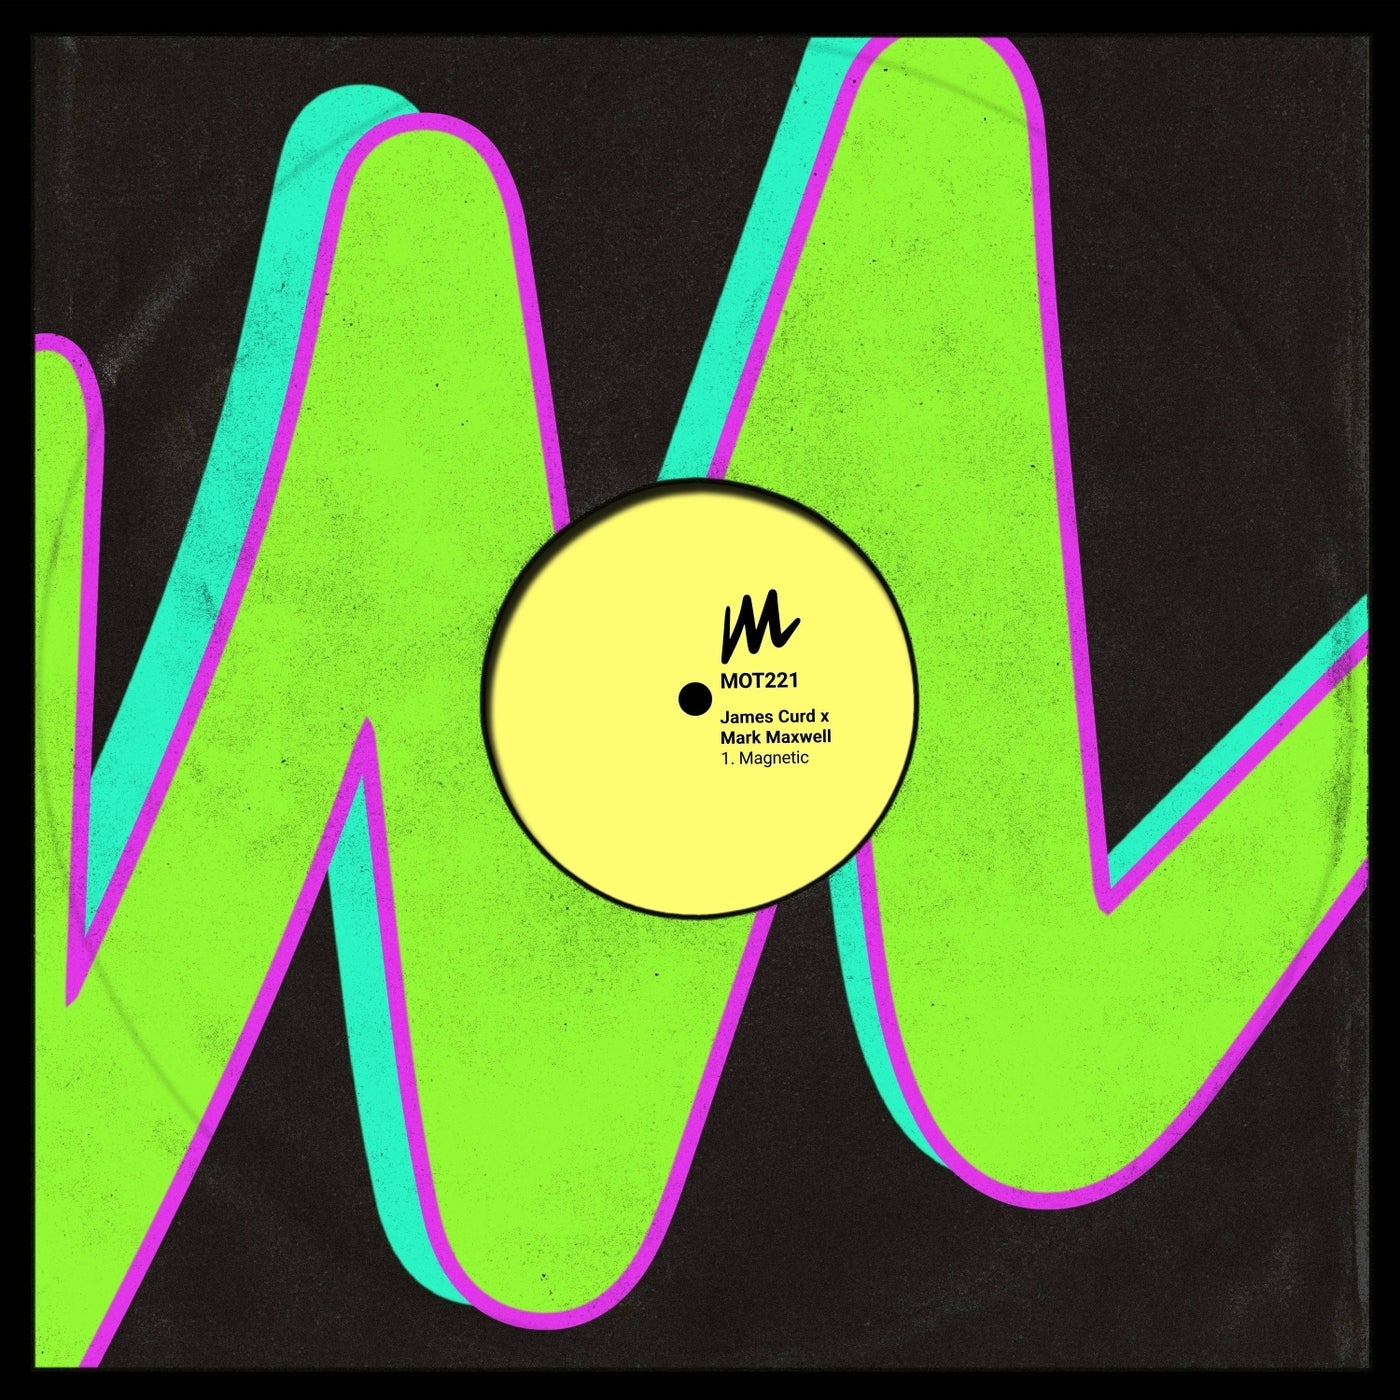 image cover: James Curd, Mark Maxwell - Magnetic on Motive Records